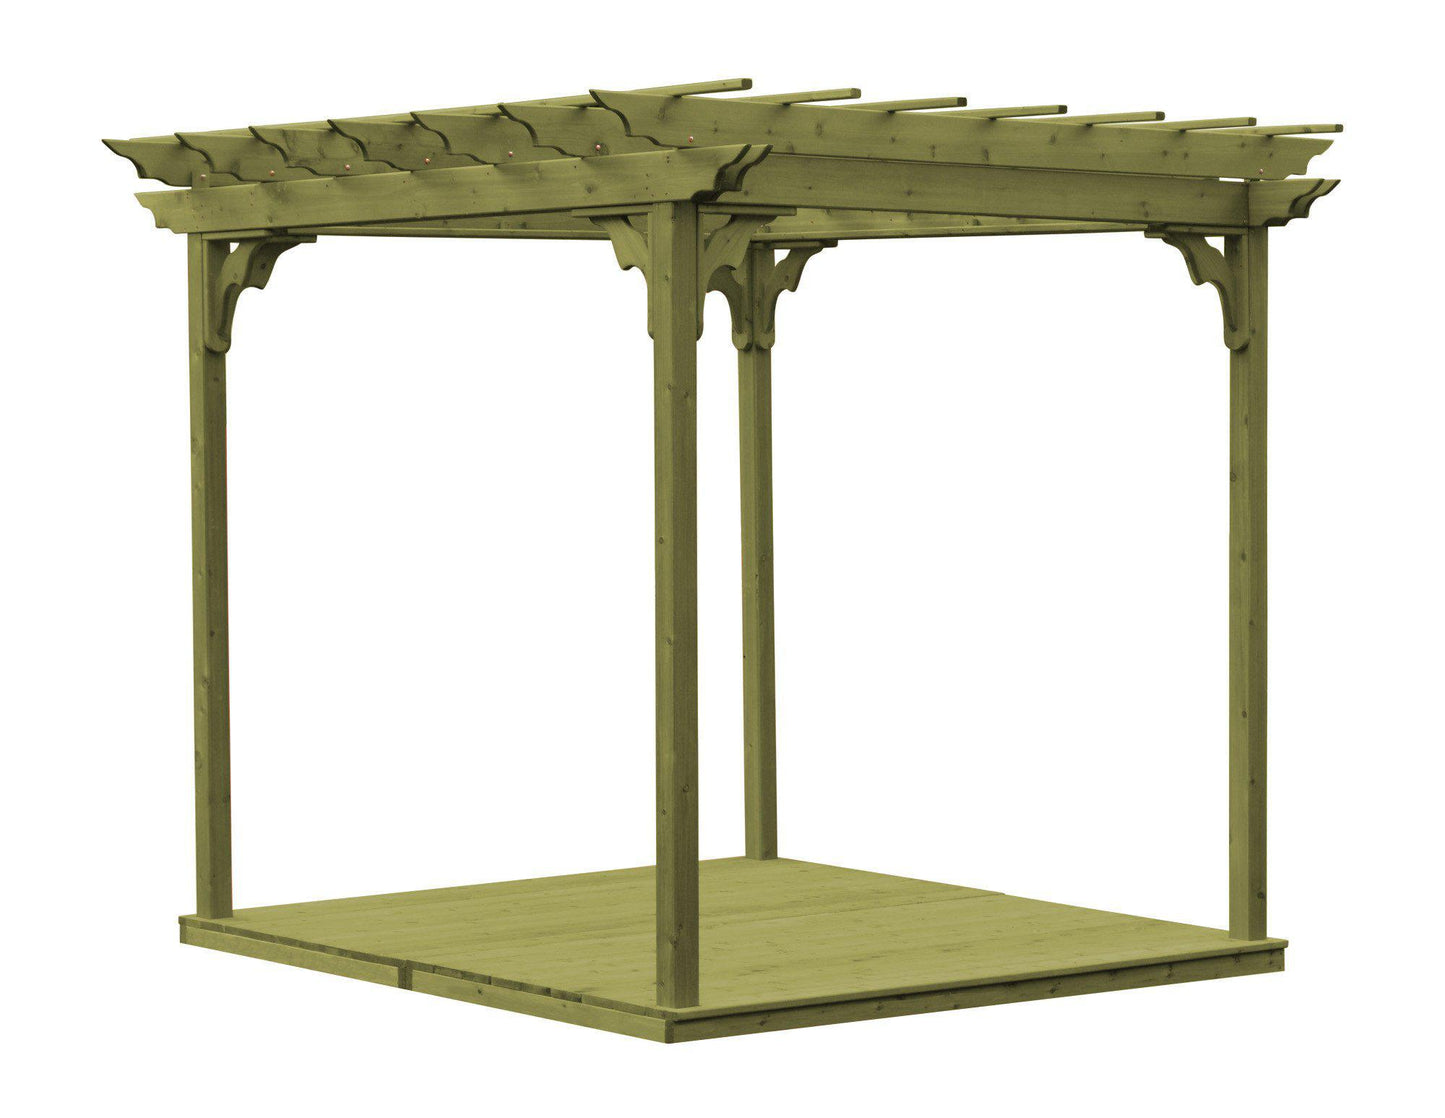 A&L FURNITURE CO. Western Red Cedar 8'x8' Pergola w/Deck & Swing Hangers - LEAD TIME TO SHIP 4 WEEKS OR LESS